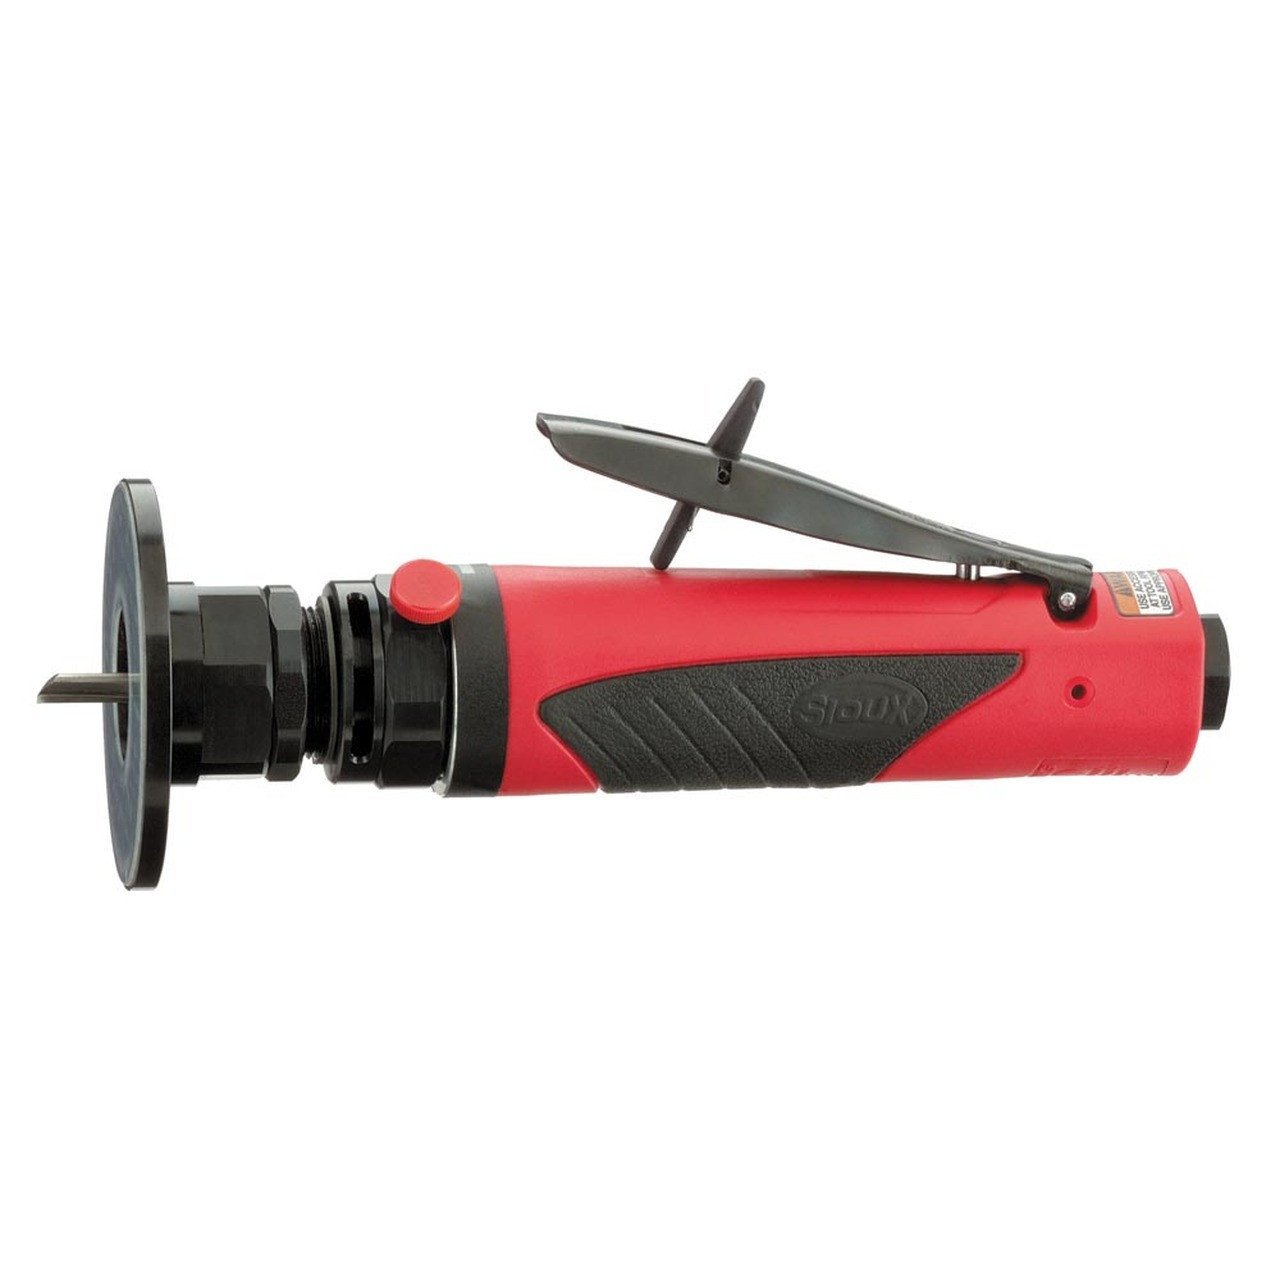 Sioux Tools SRT10S25B 3" Base Router | 1 HP | 25,000 RPM